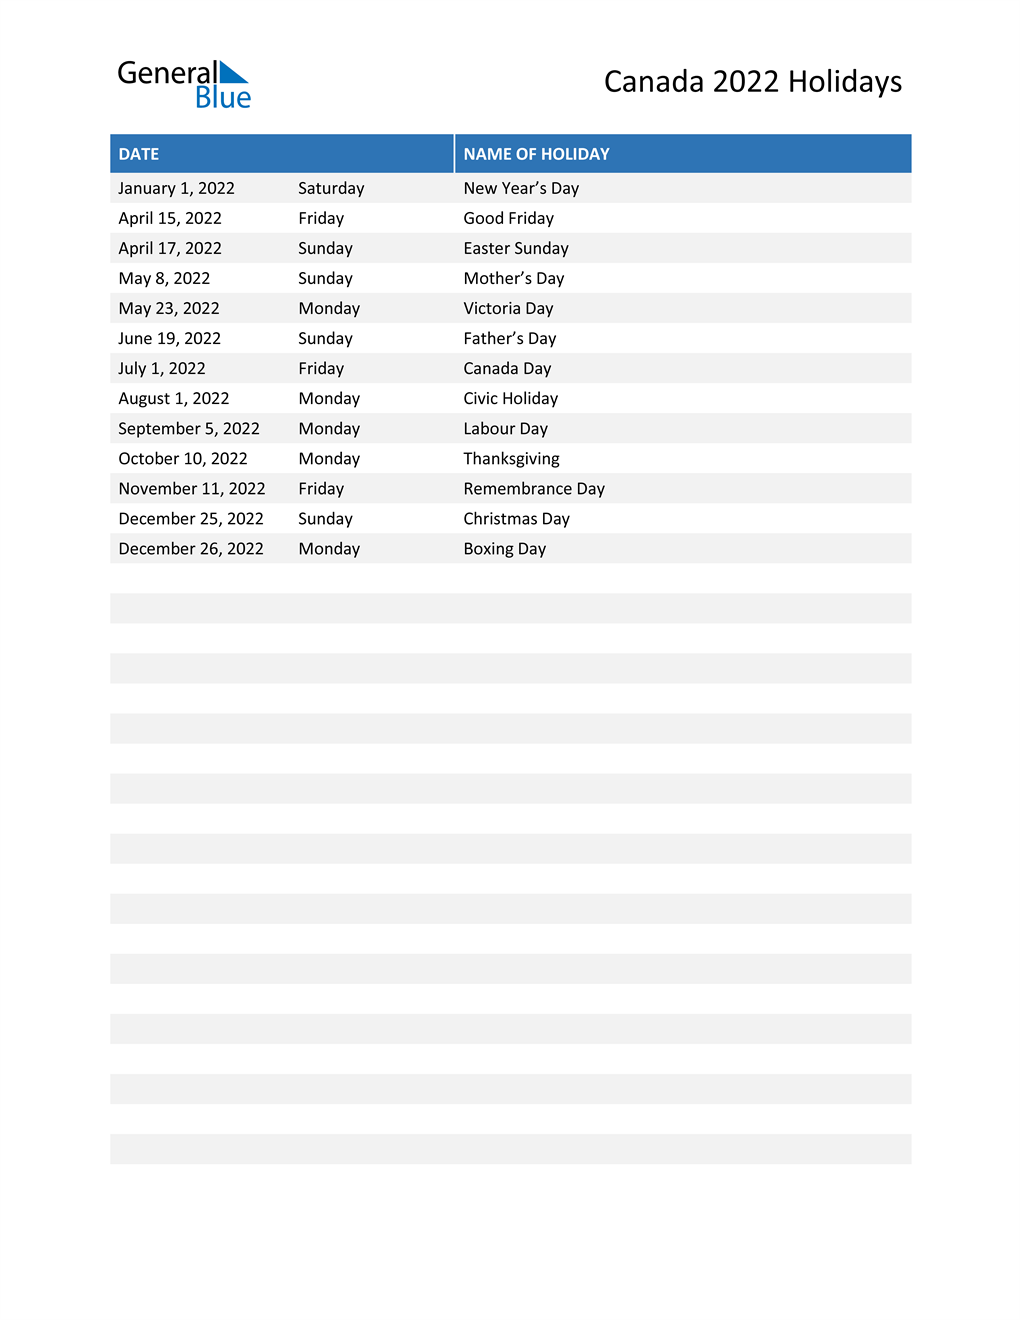 Canada Holiday Calendar 2022 Canada Holidays 2022 In Pdf, Word And Excel